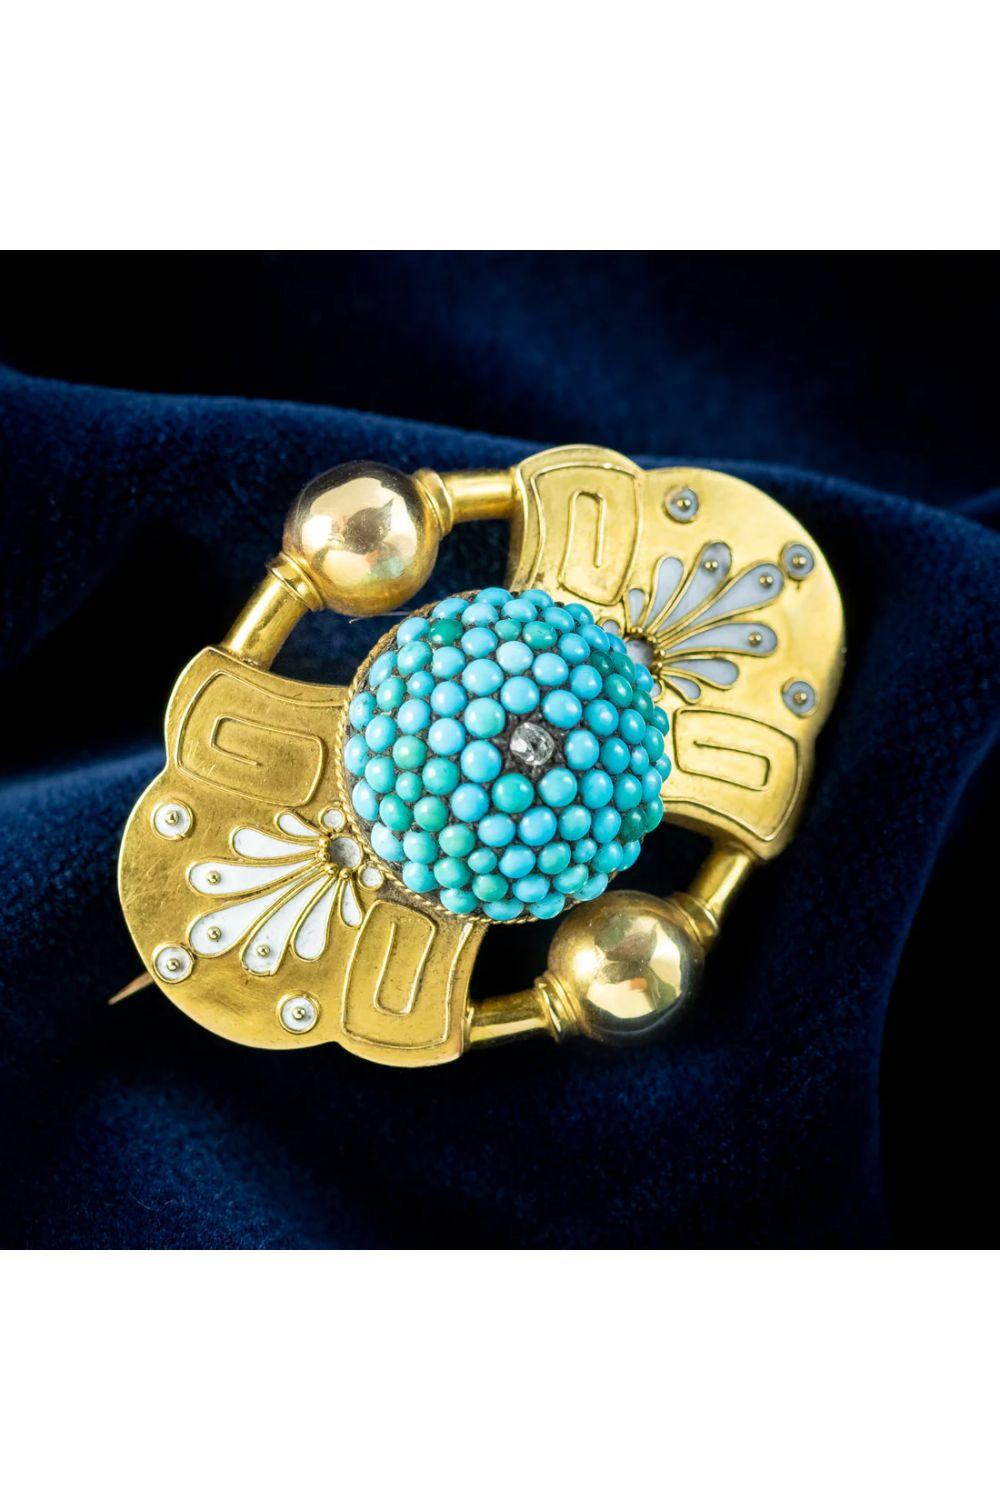 Women's Etruscan Turquoise Diamond Mourning Brooch in 18ct Gold., circa 1860 – 1880 For Sale